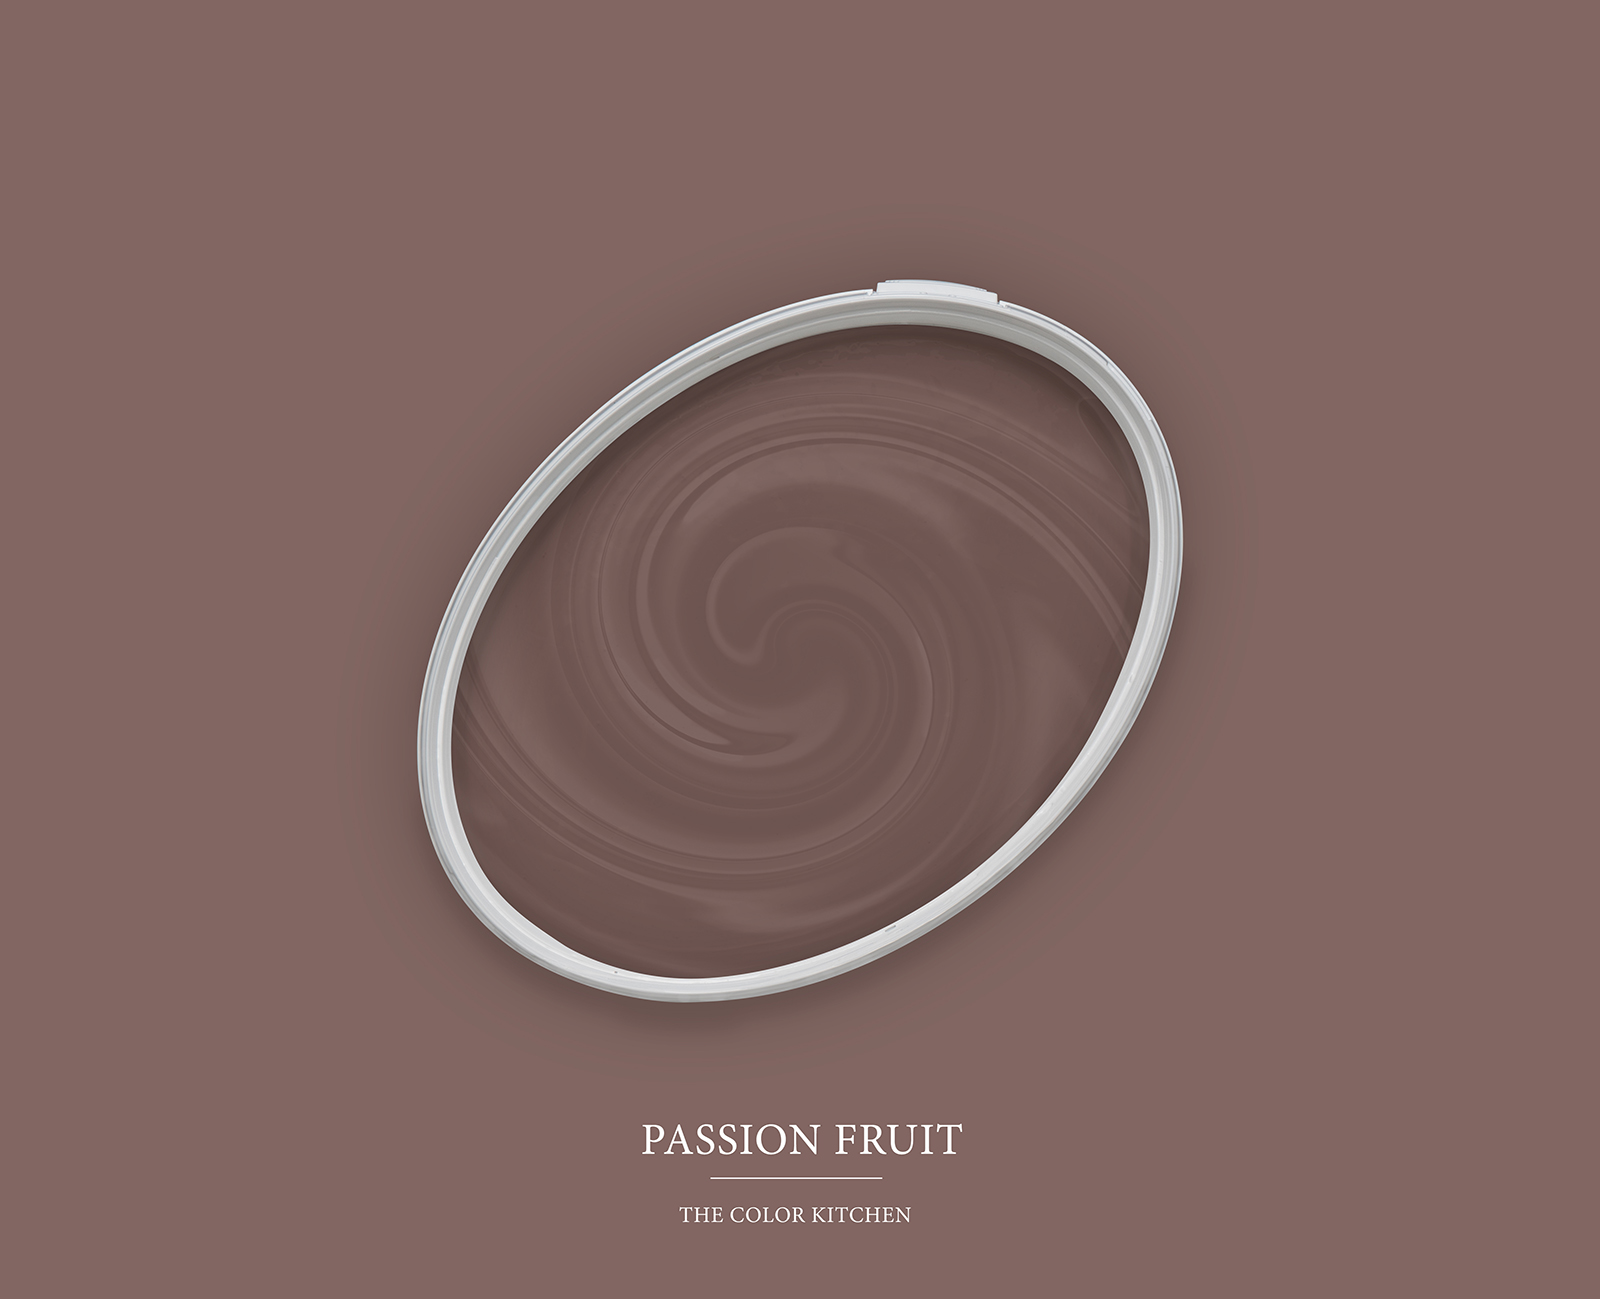         Wall Paint TCK5015 »Passion Fruit« in reddish brown – 2.5 litre
    